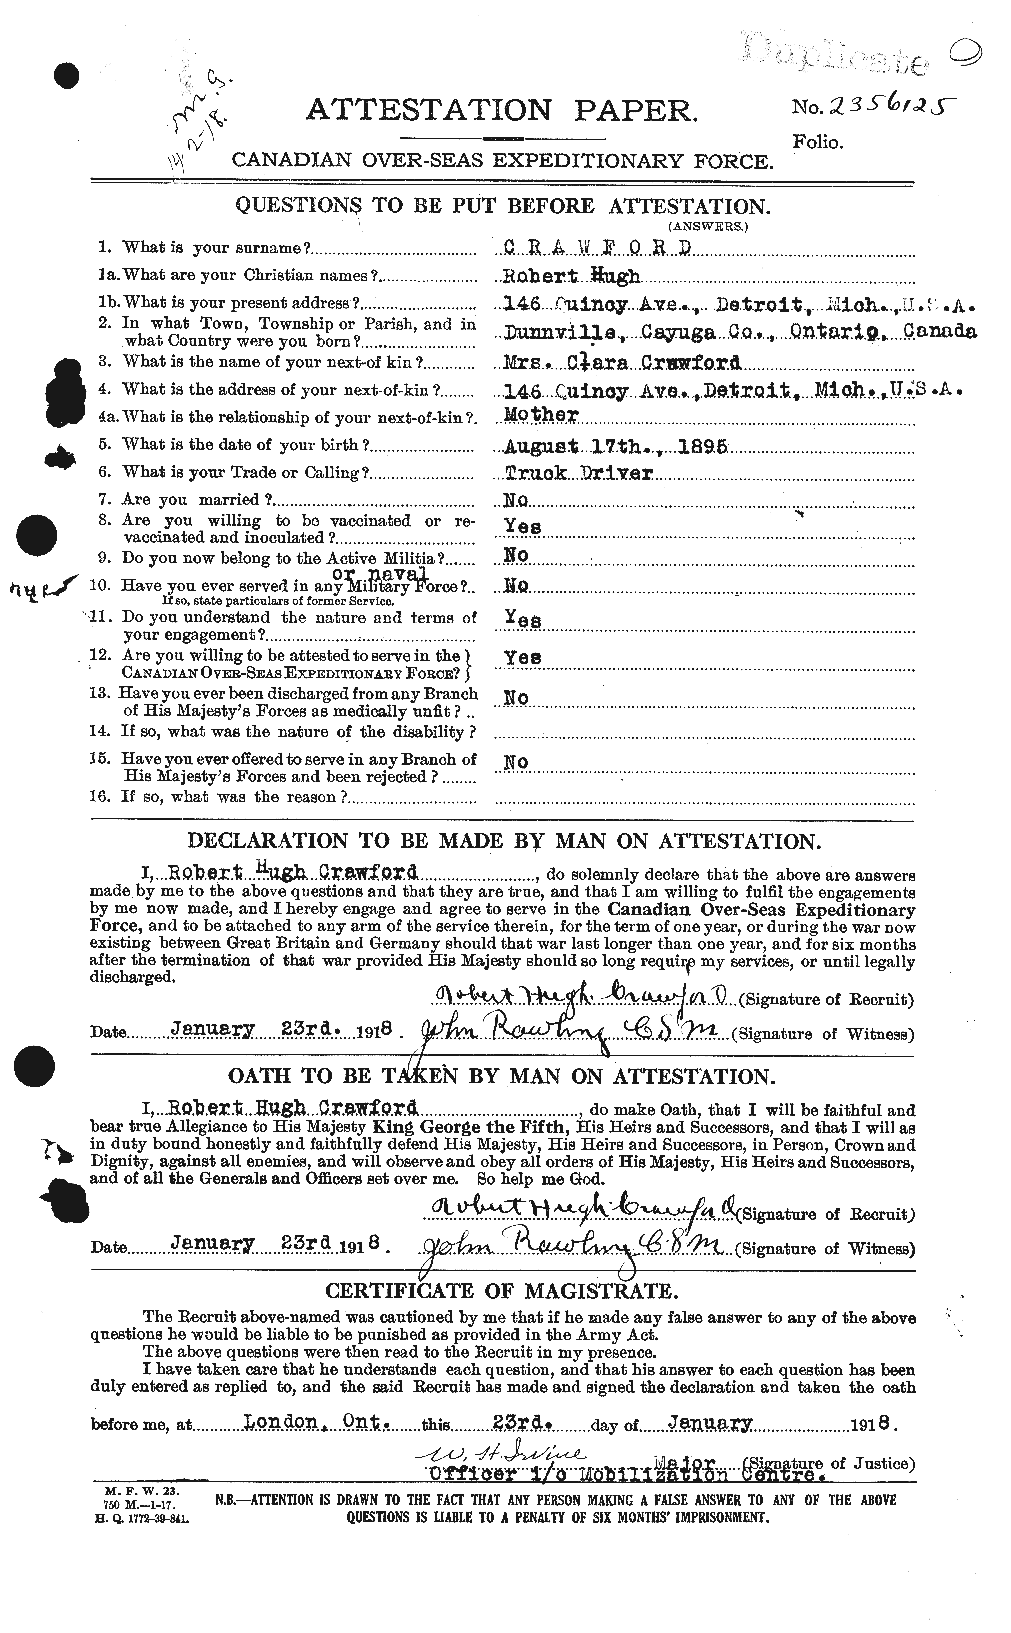 Personnel Records of the First World War - CEF 061620a